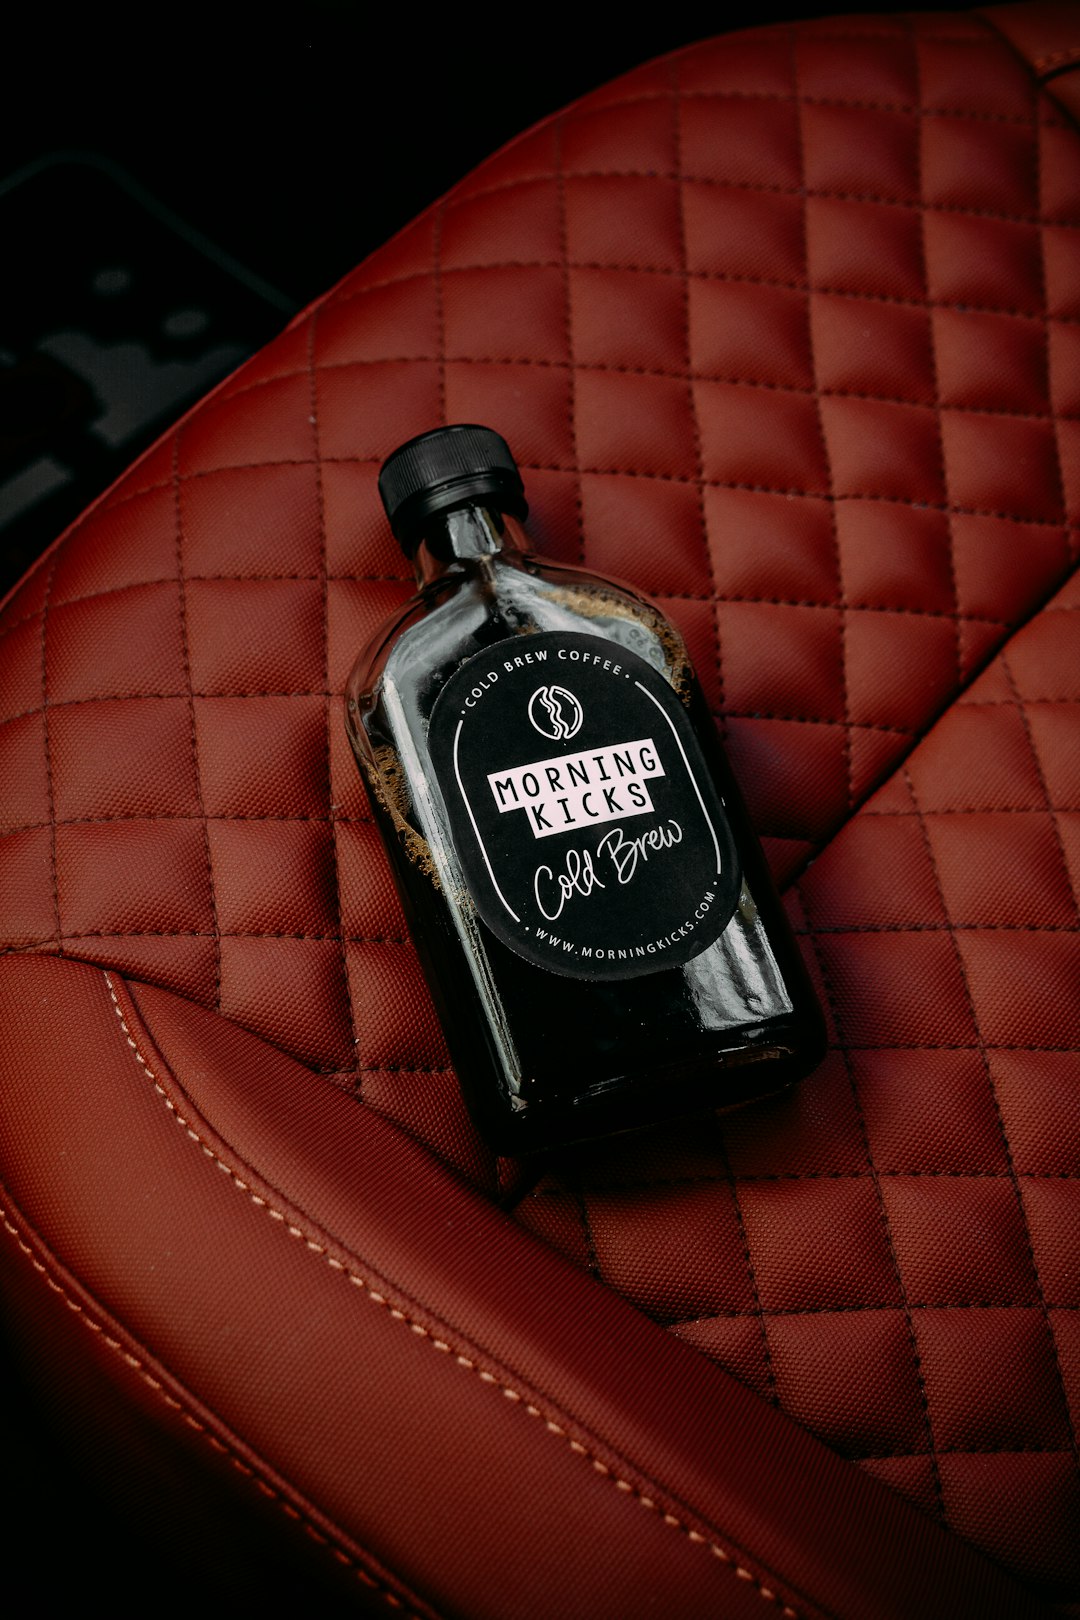 black and silver jack daniels bottle on red leather textile